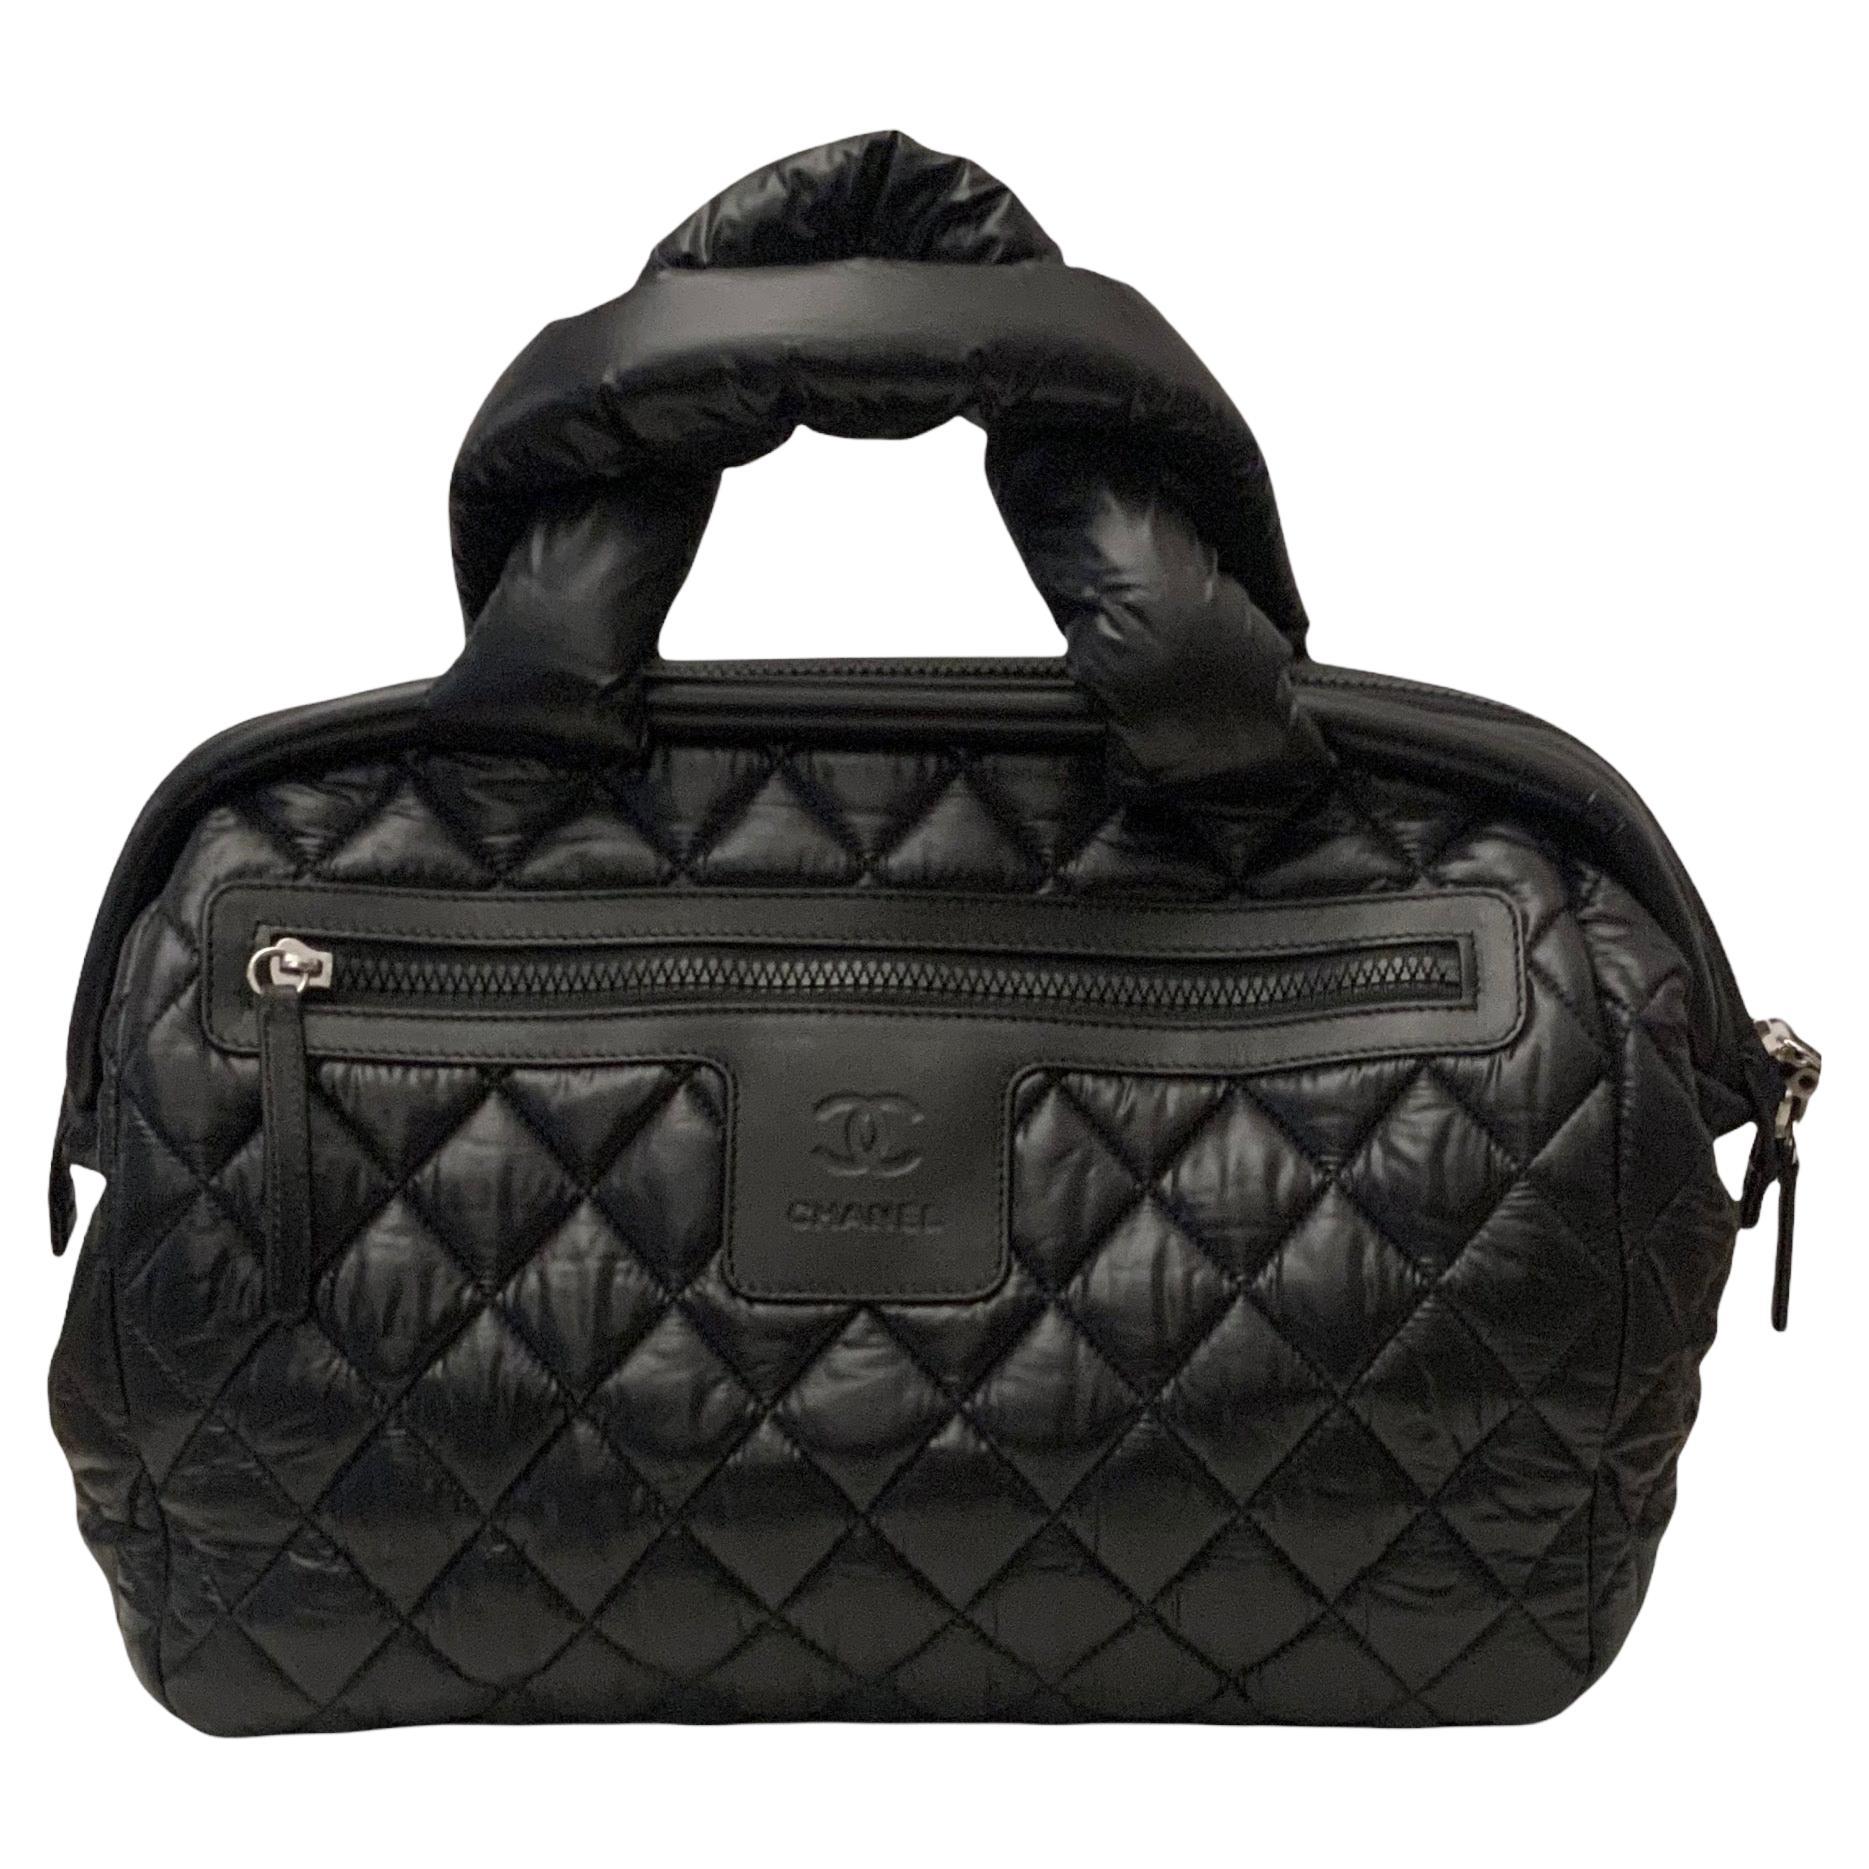 Chanel Red Nylon Coco Cocoon Bag For Sale at 1stDibs